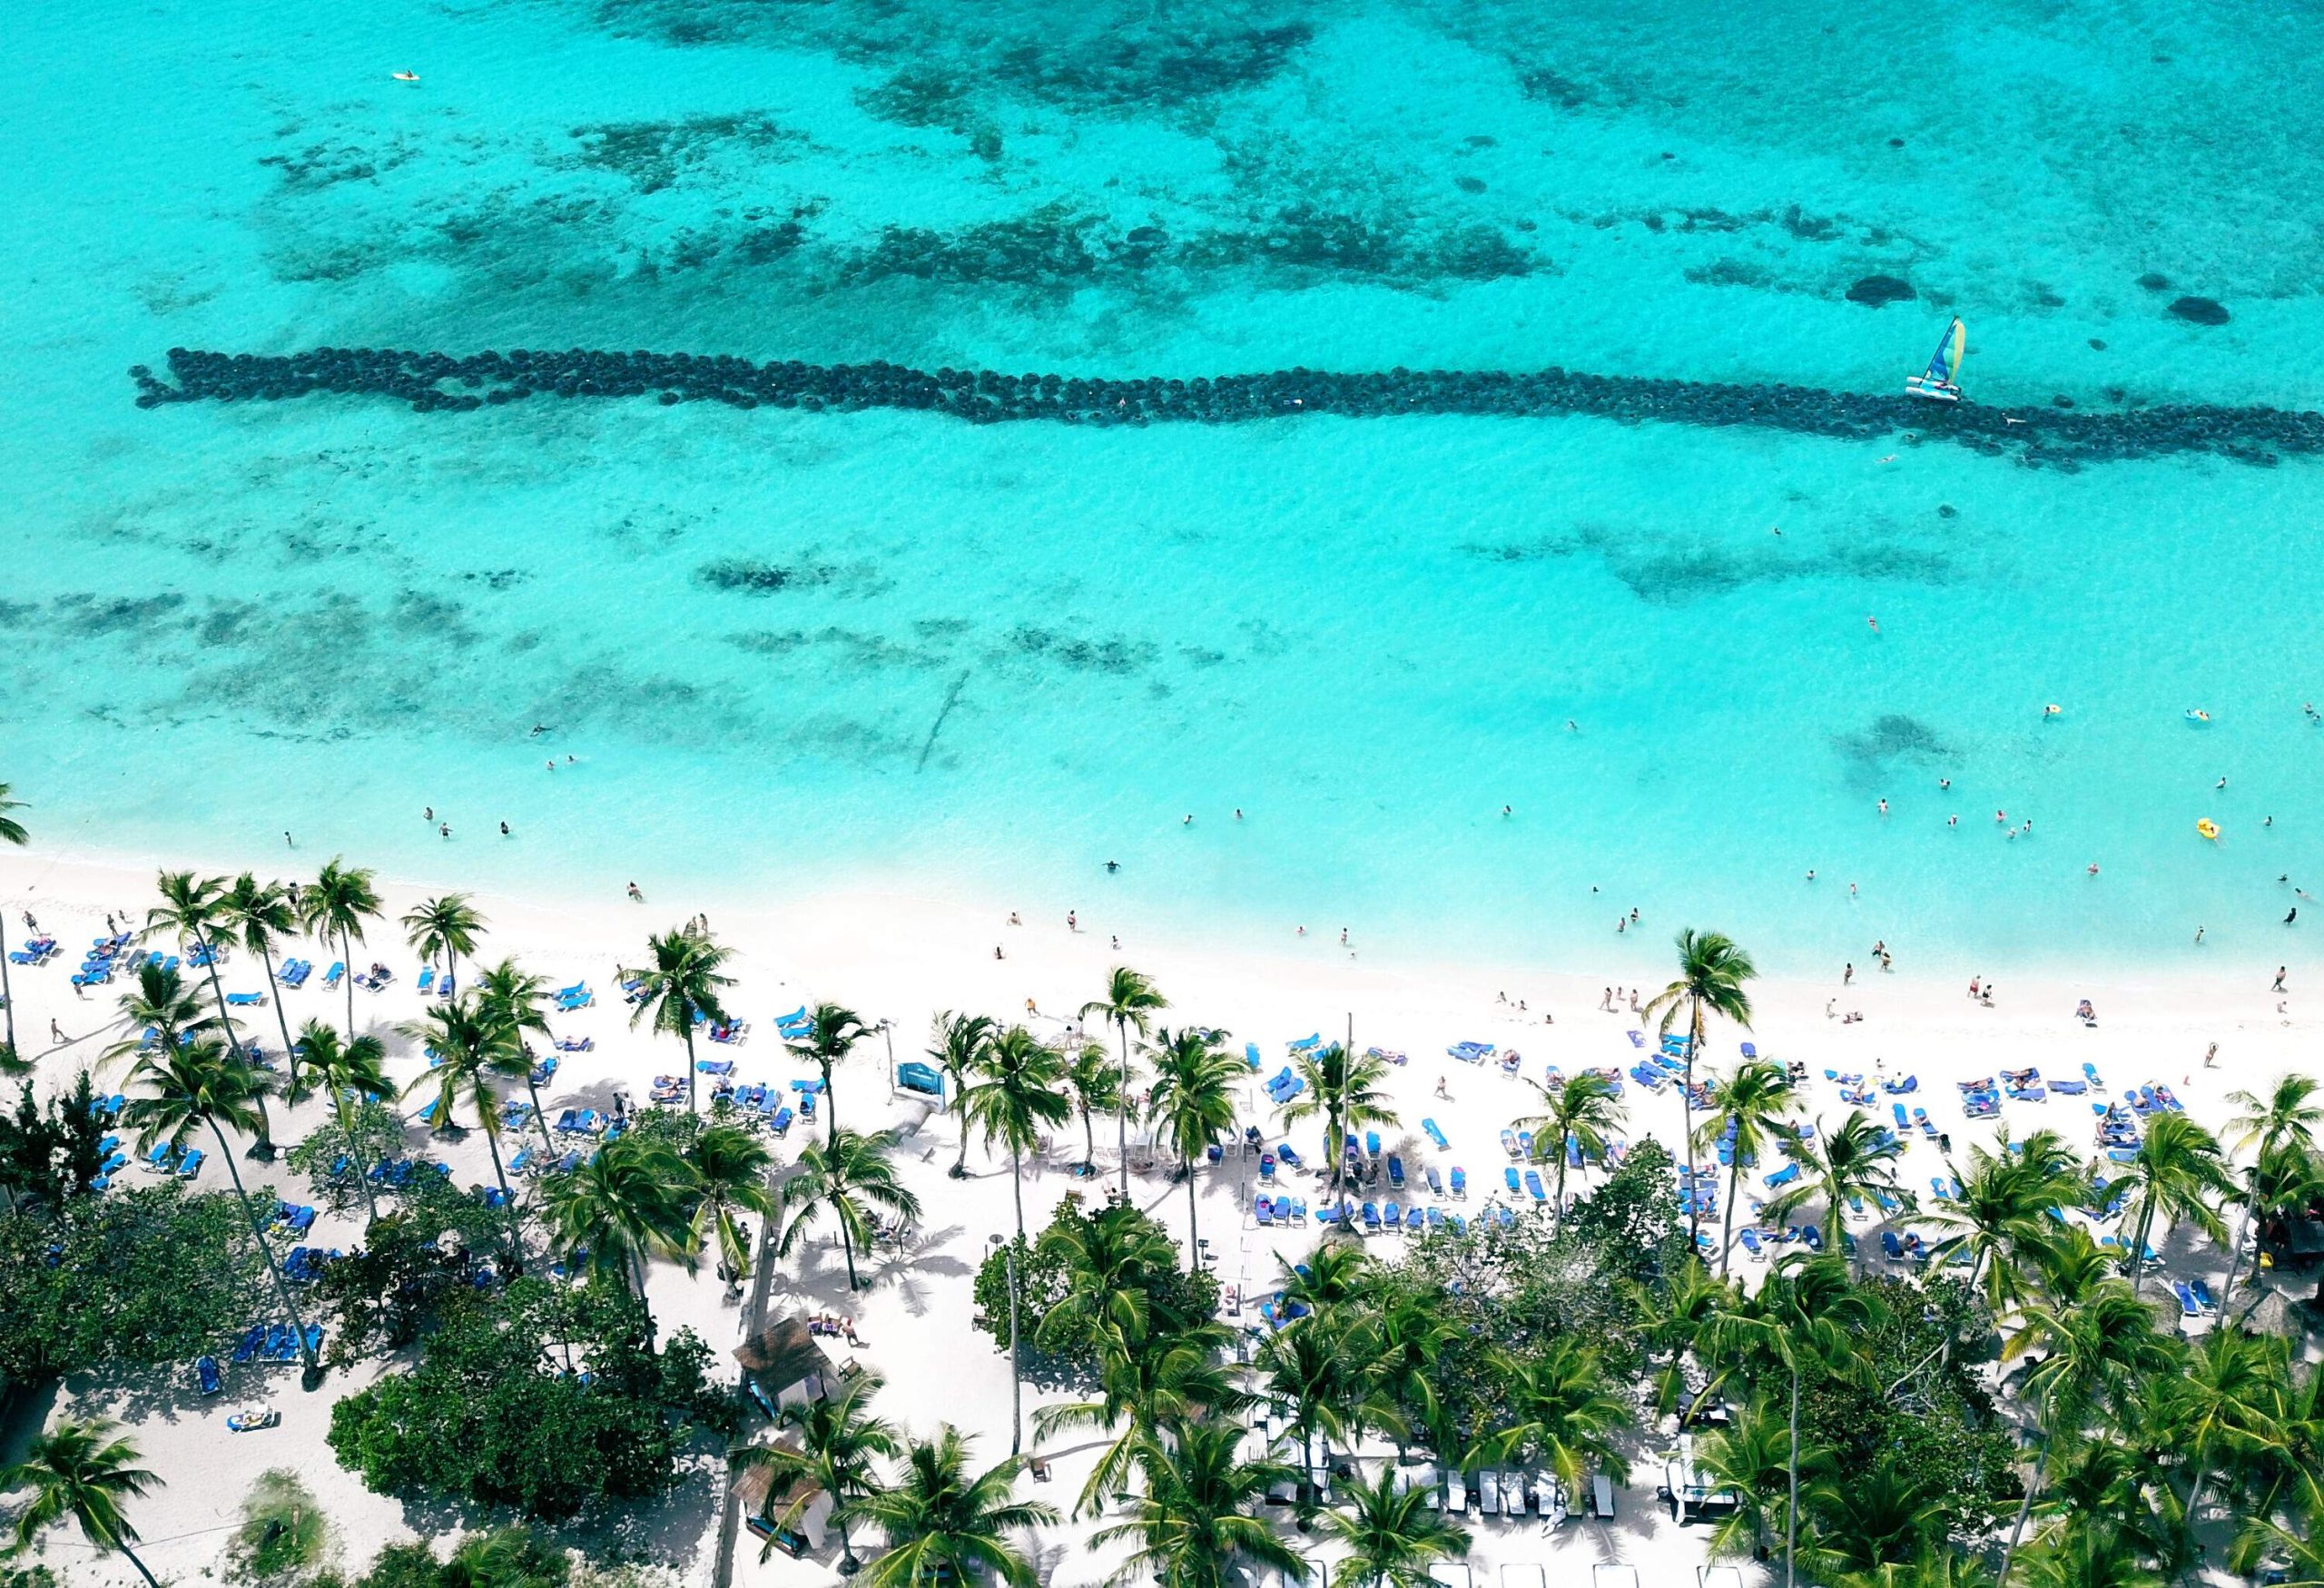 A crowded white sand beach with a cluster of sunbeds along a grove of palm trees beside the crystal-clear turquoise waters.